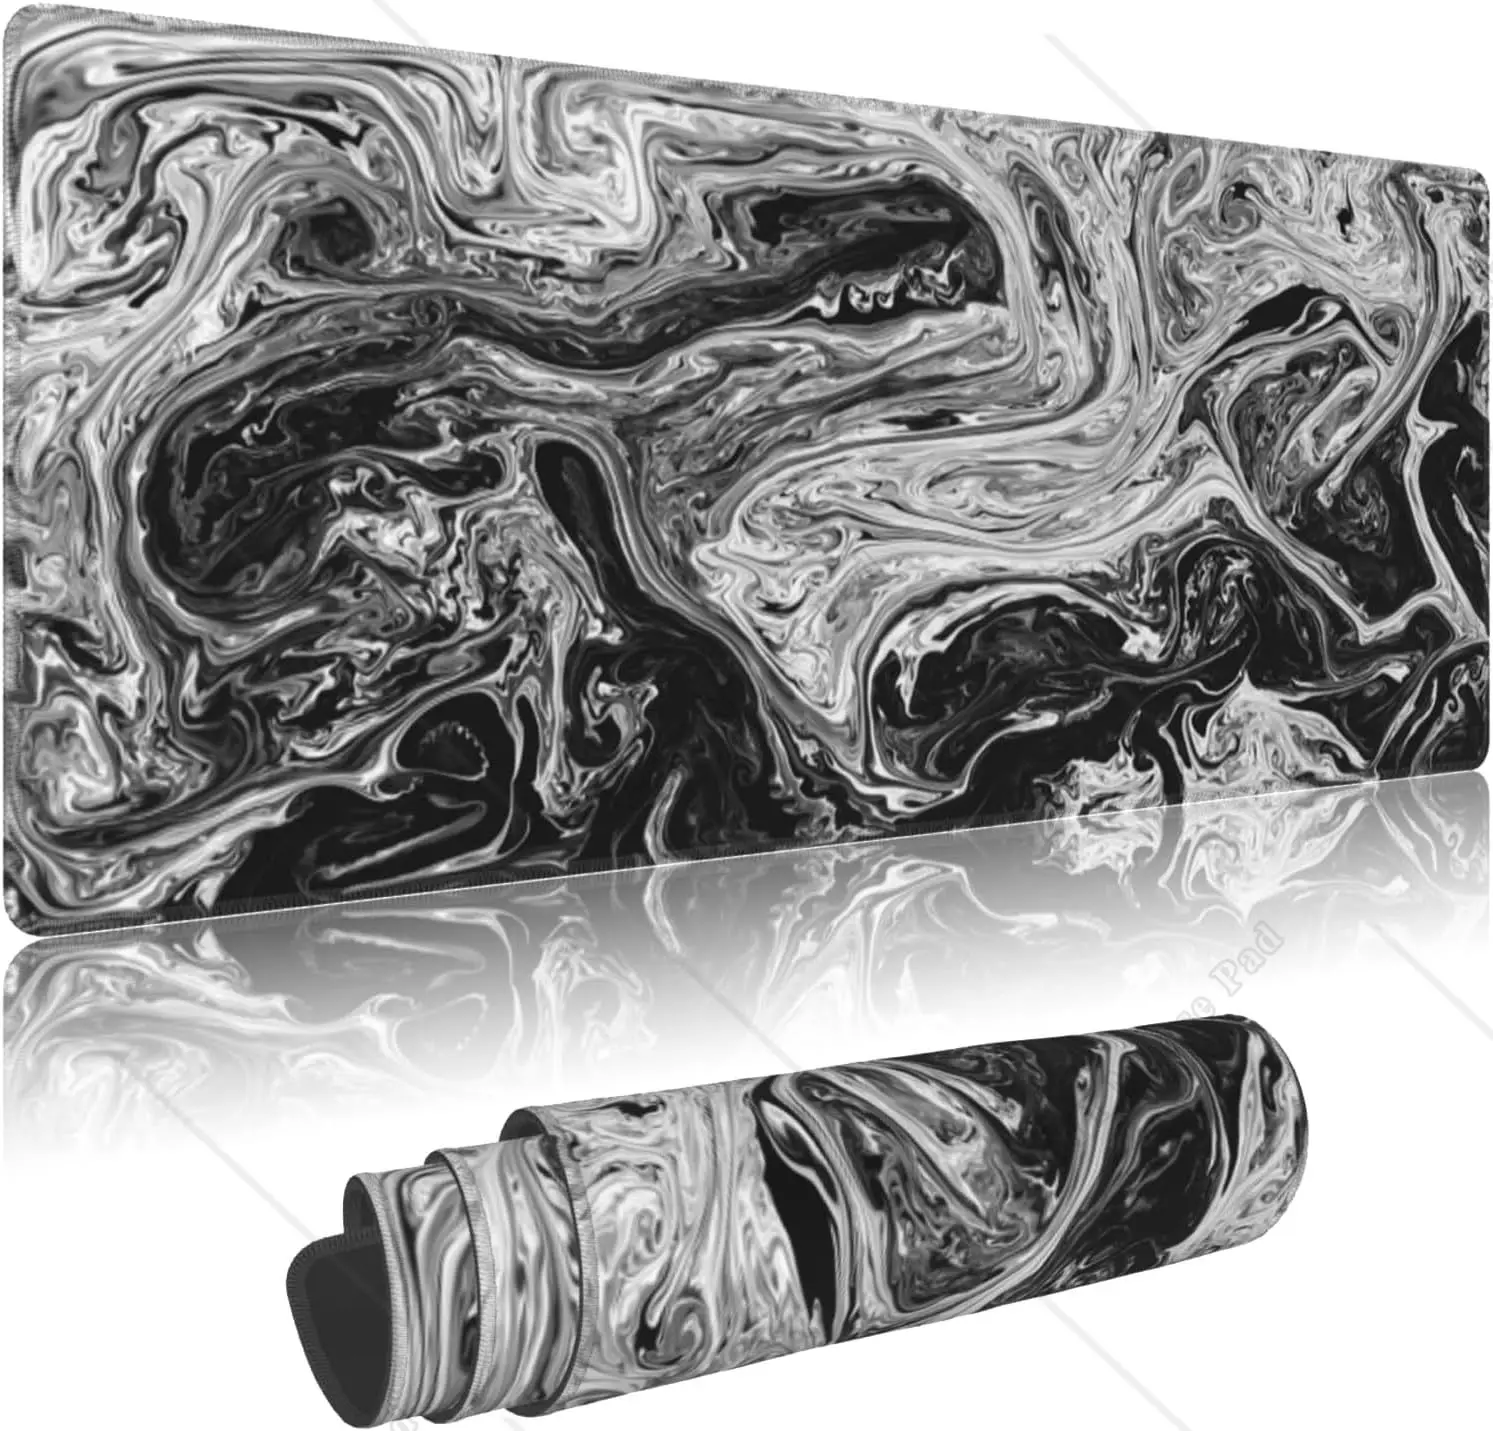 

Black and White Marble Fluid Texture Design Gaming Mouse Pad XXL Large Mouse Pad with Non Slip Rubber Base 11.8 X 31.5 Inch